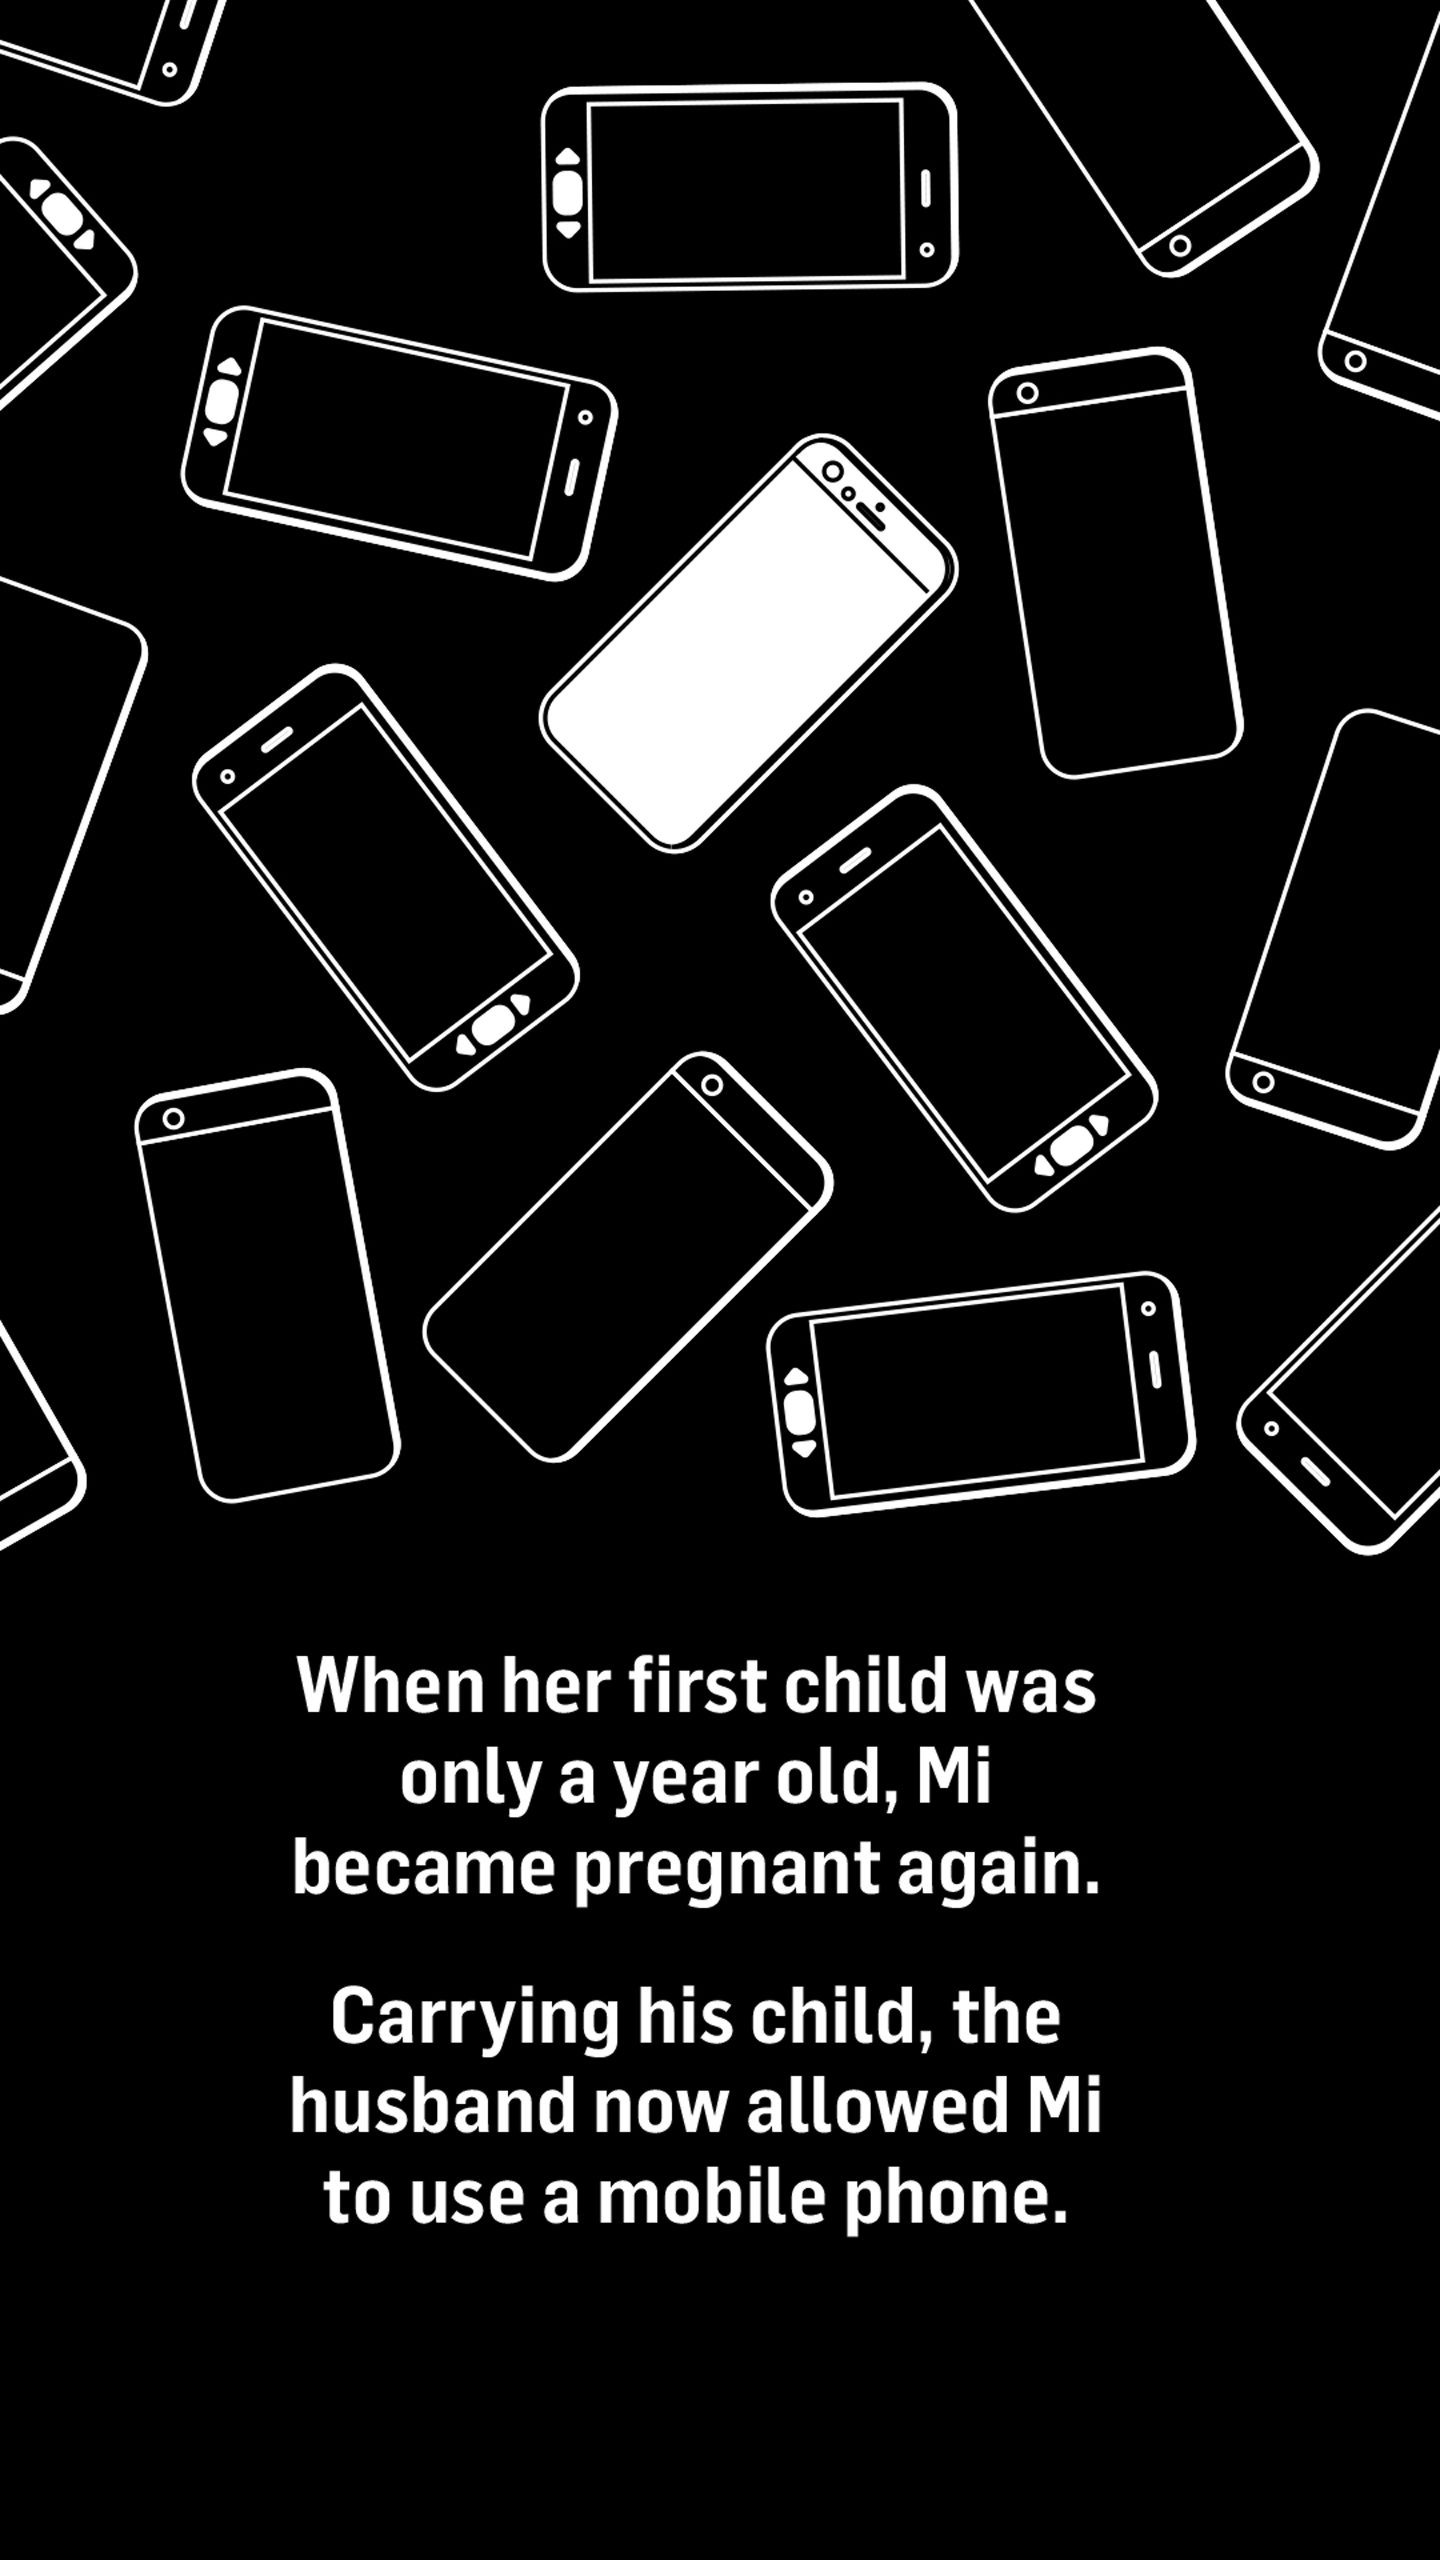 Silhouettes of lots of mobile phones and one of them shows the white back. Text reads: When her first child was only a year old, Mi became pregnant again.

Carrying his child, the husband now allowed Mi to use a mobile phone.